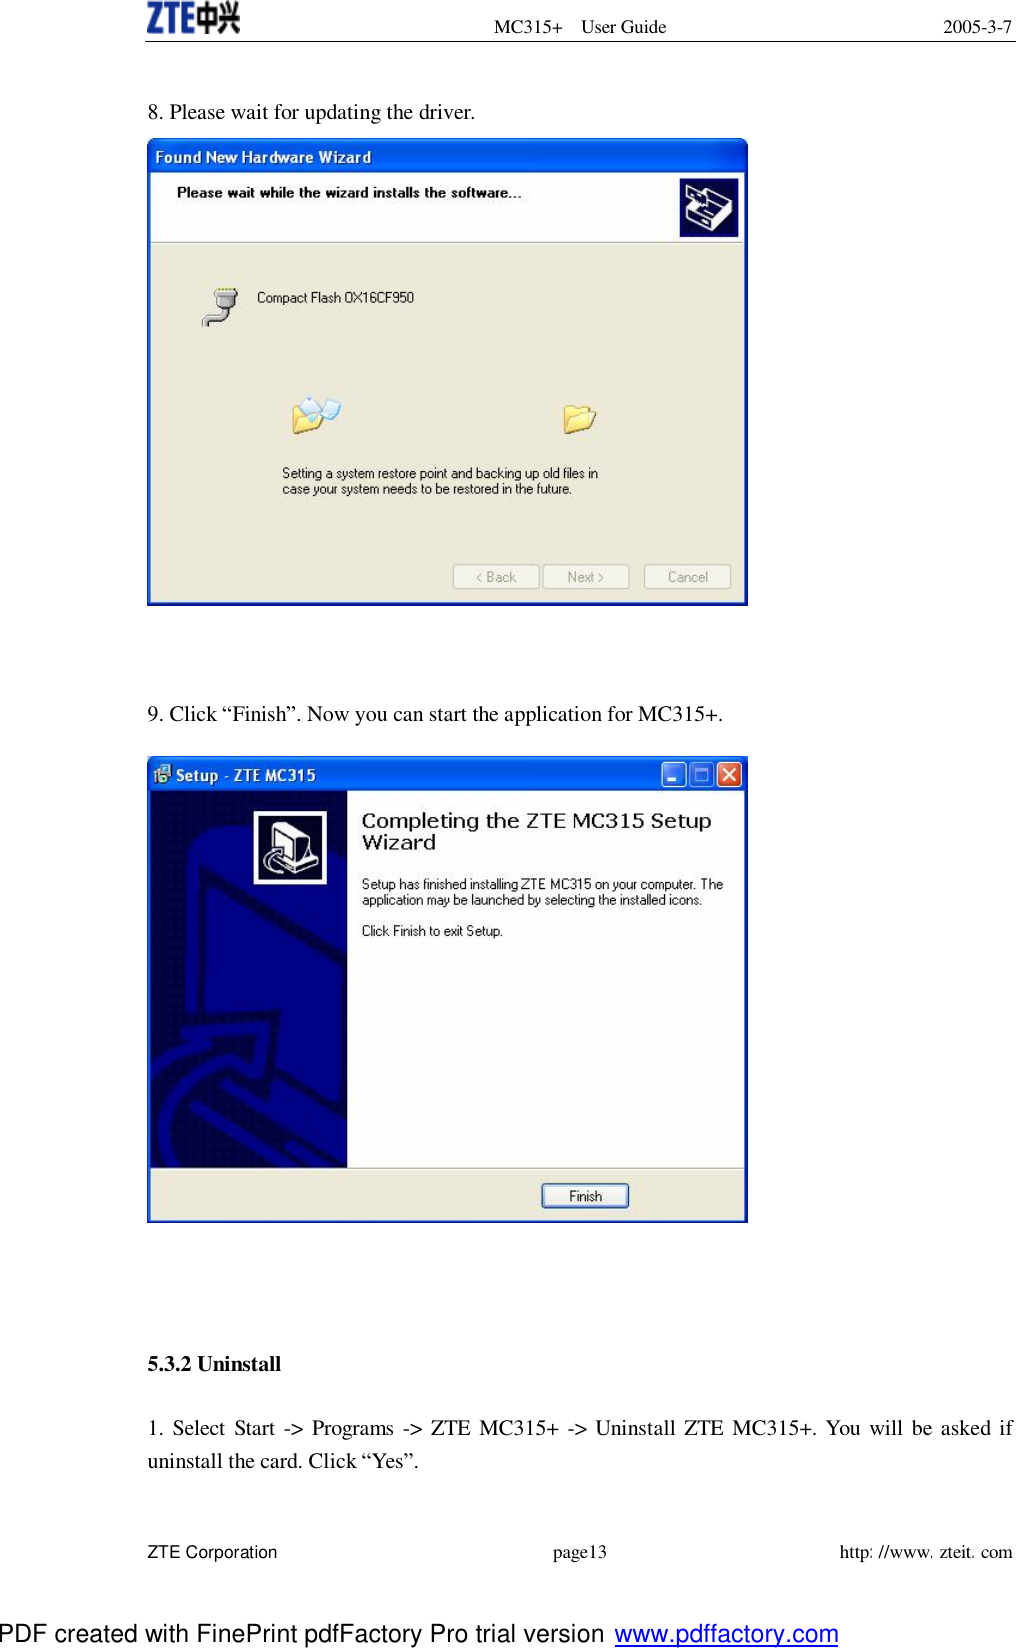  MC315+ User Guide 2005-3-7  ZTE Corporation page13 http://www.zteit.com  8. Please wait for updating the driver.    9. Click “Finish”. Now you can start the application for MC315+.     5.3.2 Uninstall  1. Select Start -&gt; Programs -&gt; ZTE MC315+ -&gt; Uninstall ZTE MC315+. You will be asked if uninstall the card. Click “Yes”. PDF created with FinePrint pdfFactory Pro trial version www.pdffactory.com